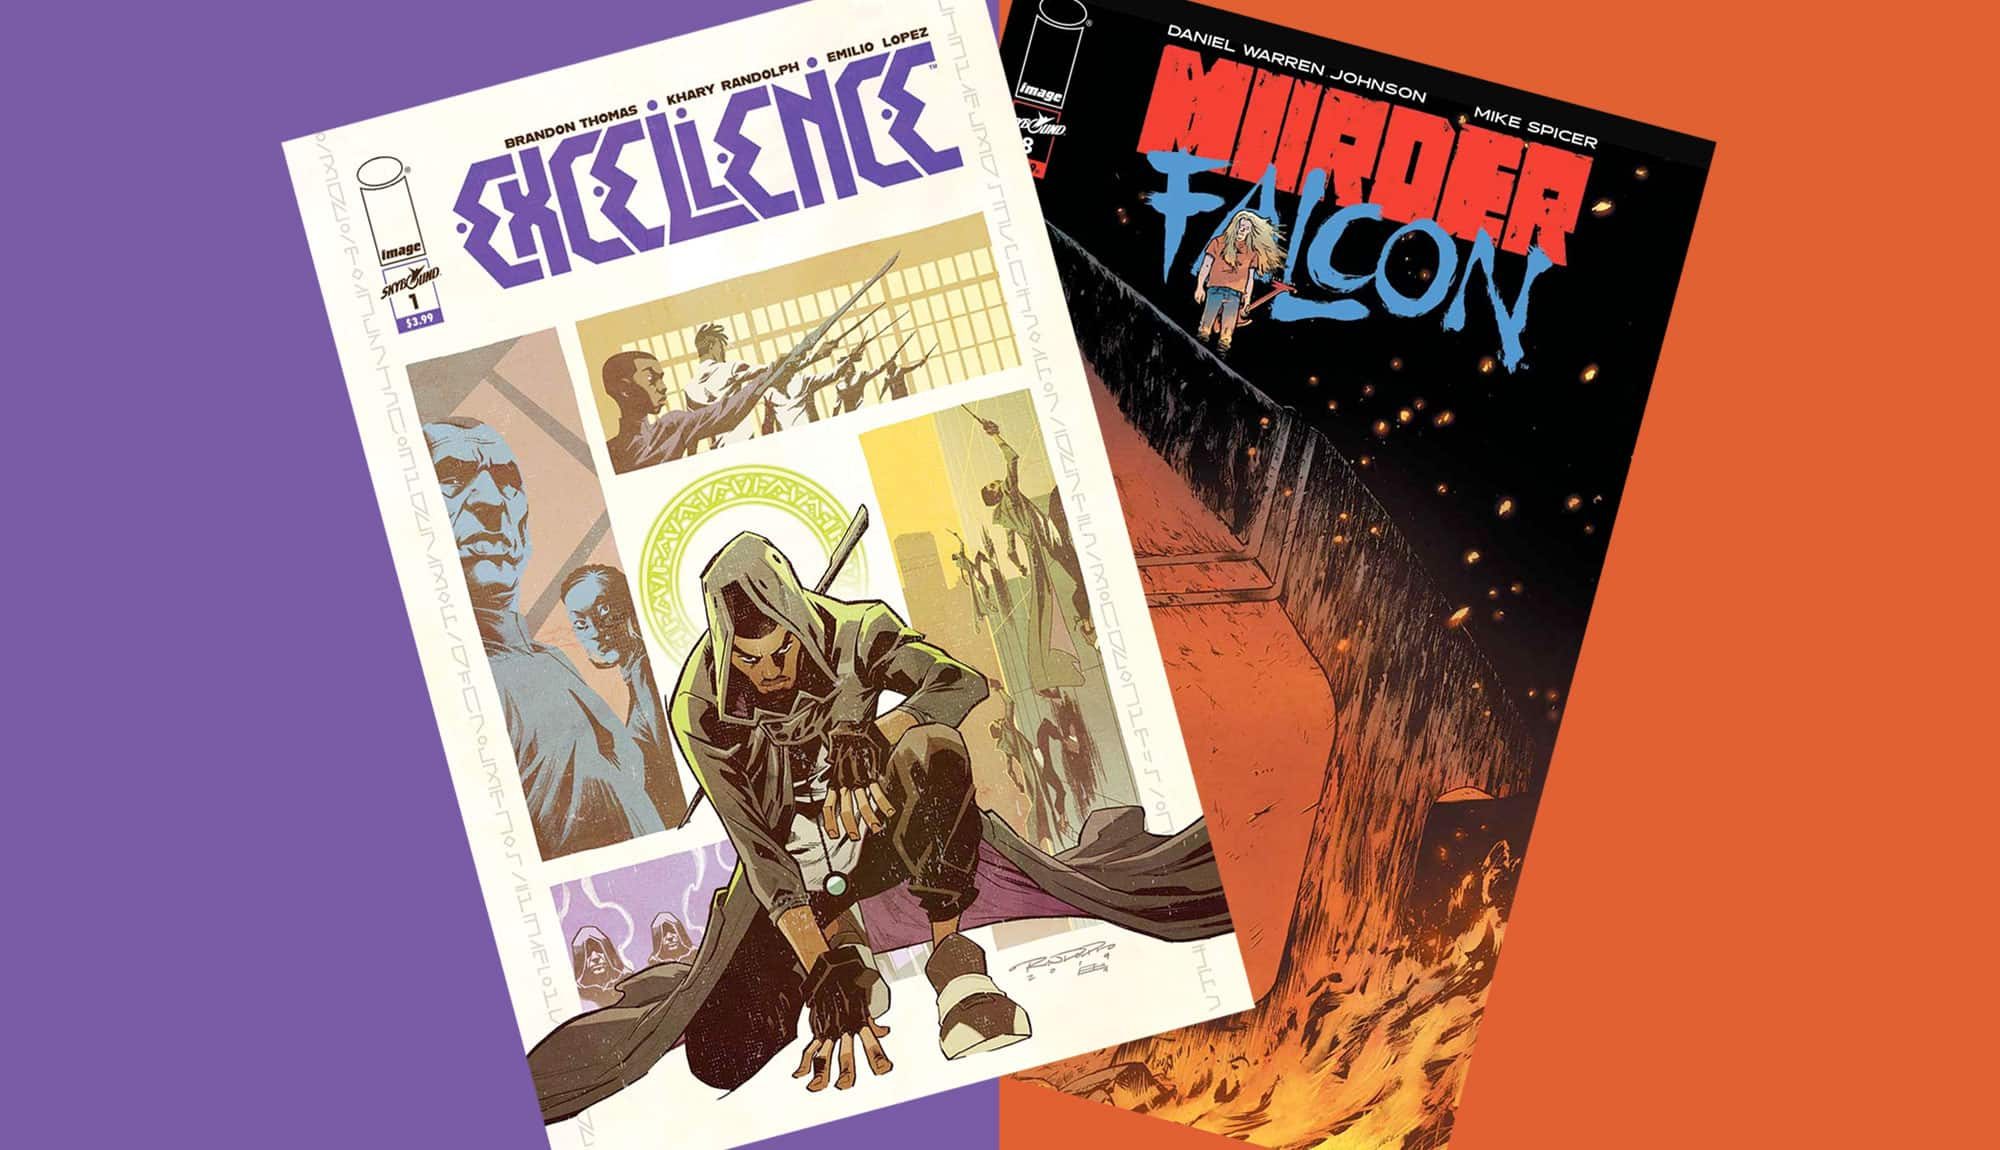 This Week’s Comics: EXCELLENCE Debuts and MURDER FALCON Concludes